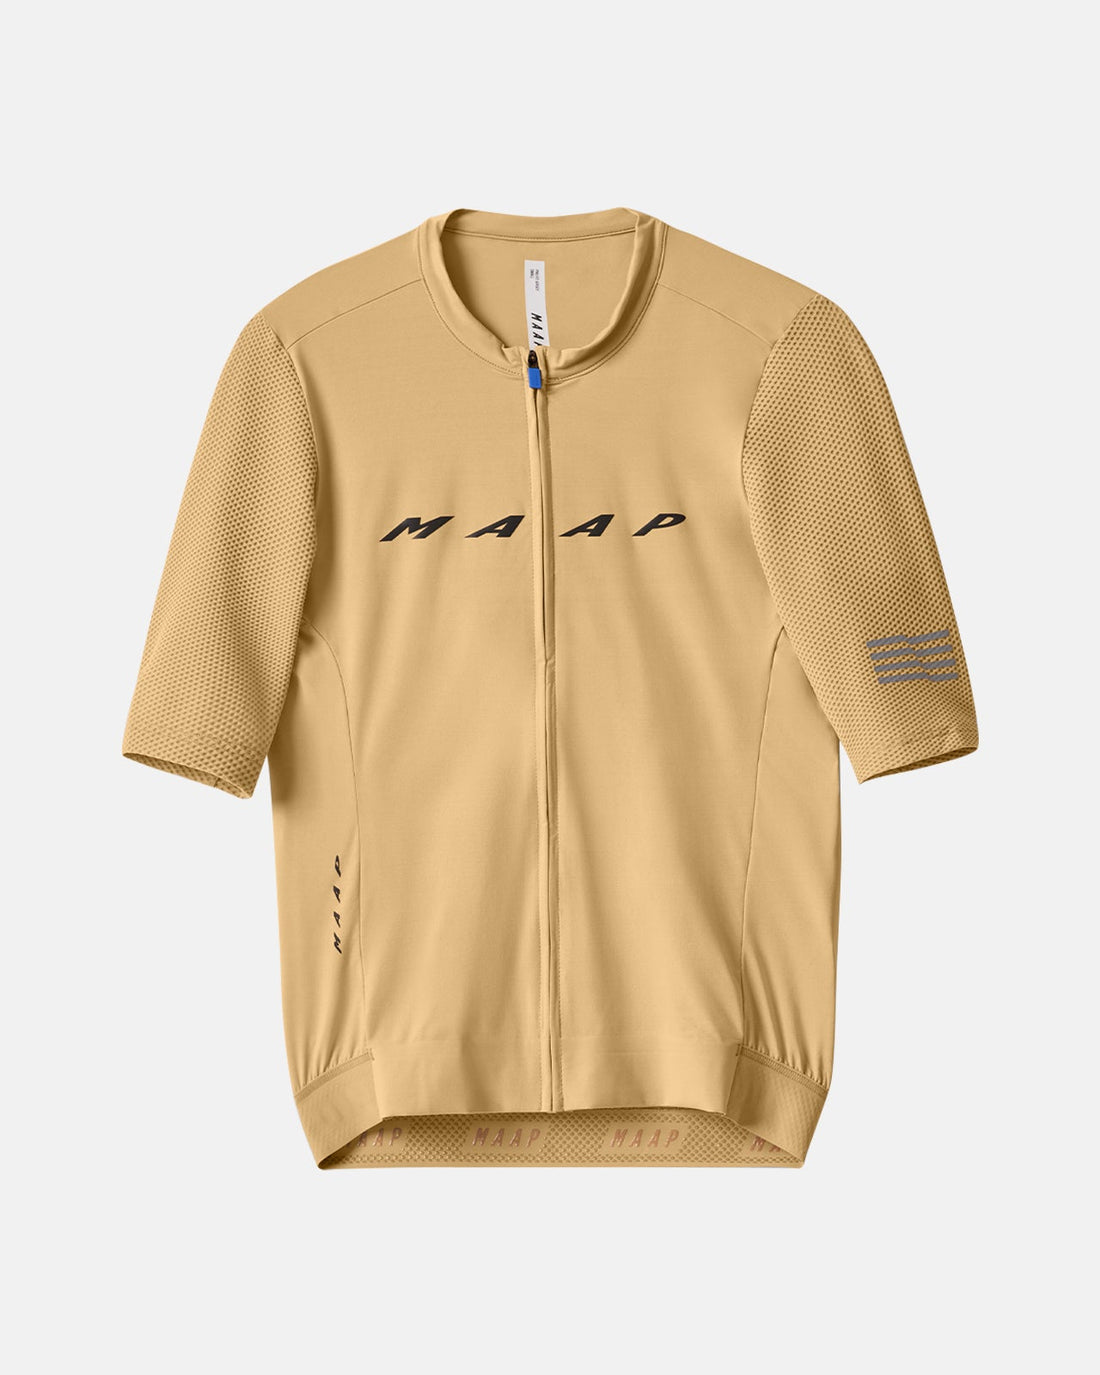 Evade Pro Base Jersey 2.0 - Fawn - MAAP